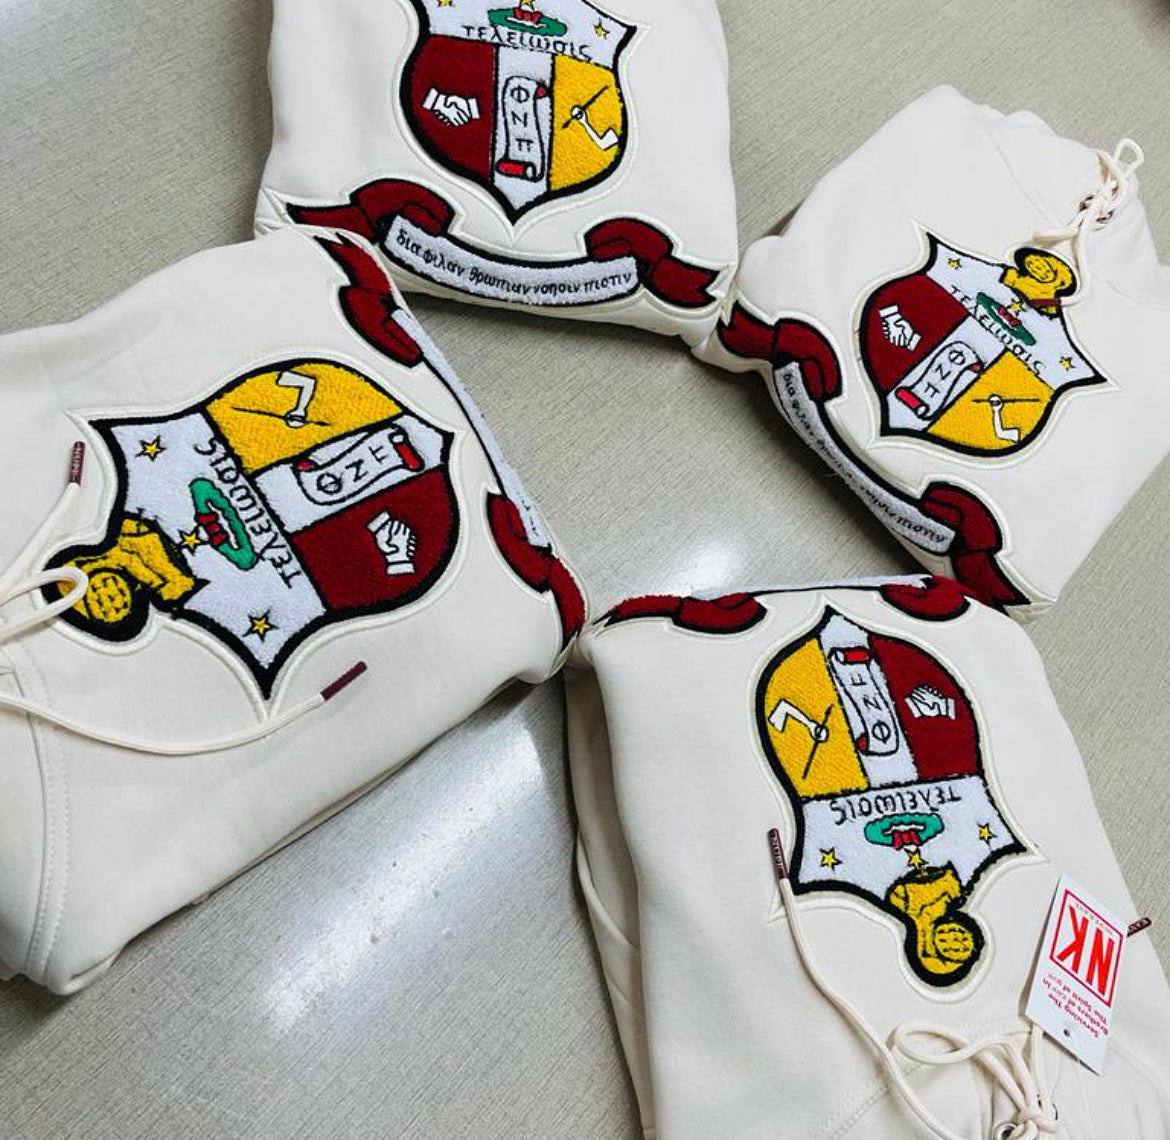 The cream color adds a touch of sophistication to your wardrobe and is perfect for any occasion. With its comfortable fit and classic design, this hoodie is sure to become a staple in your collection. Show off your pride and support for Kappa Alpha Psi with this stylish and functional piece of clothing.